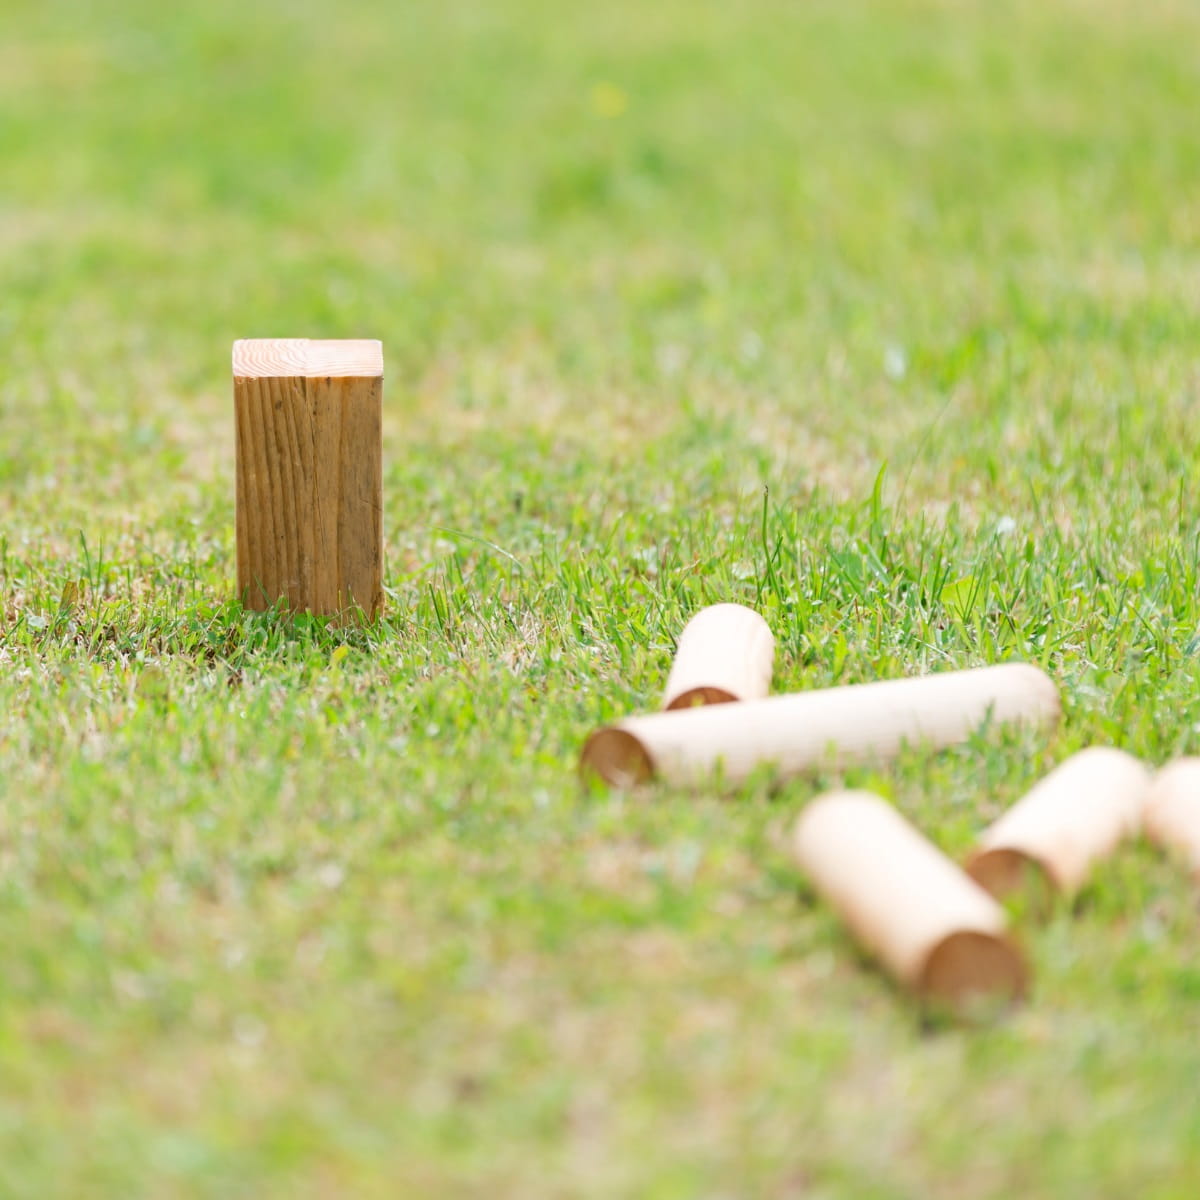 Kubb game in the yard